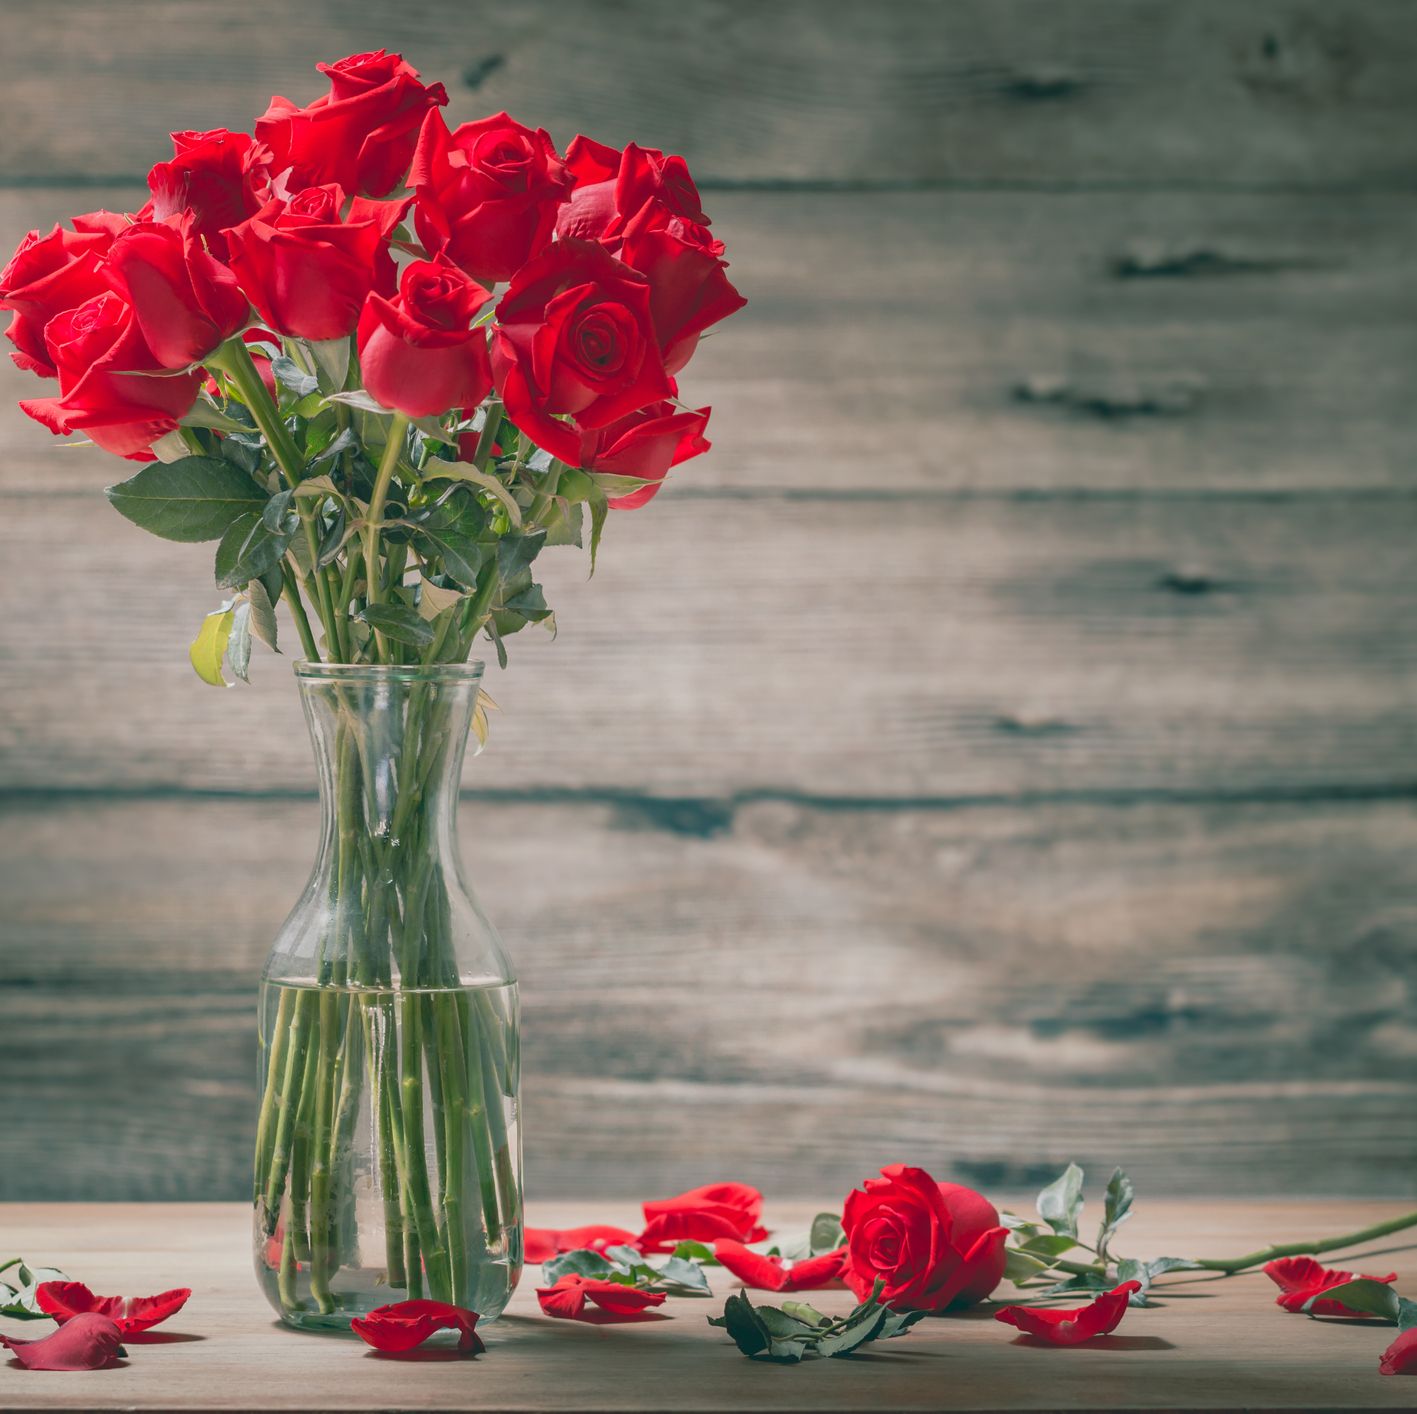 Personality Quiz: How To Buy The Right Flowers For A Loved One ...